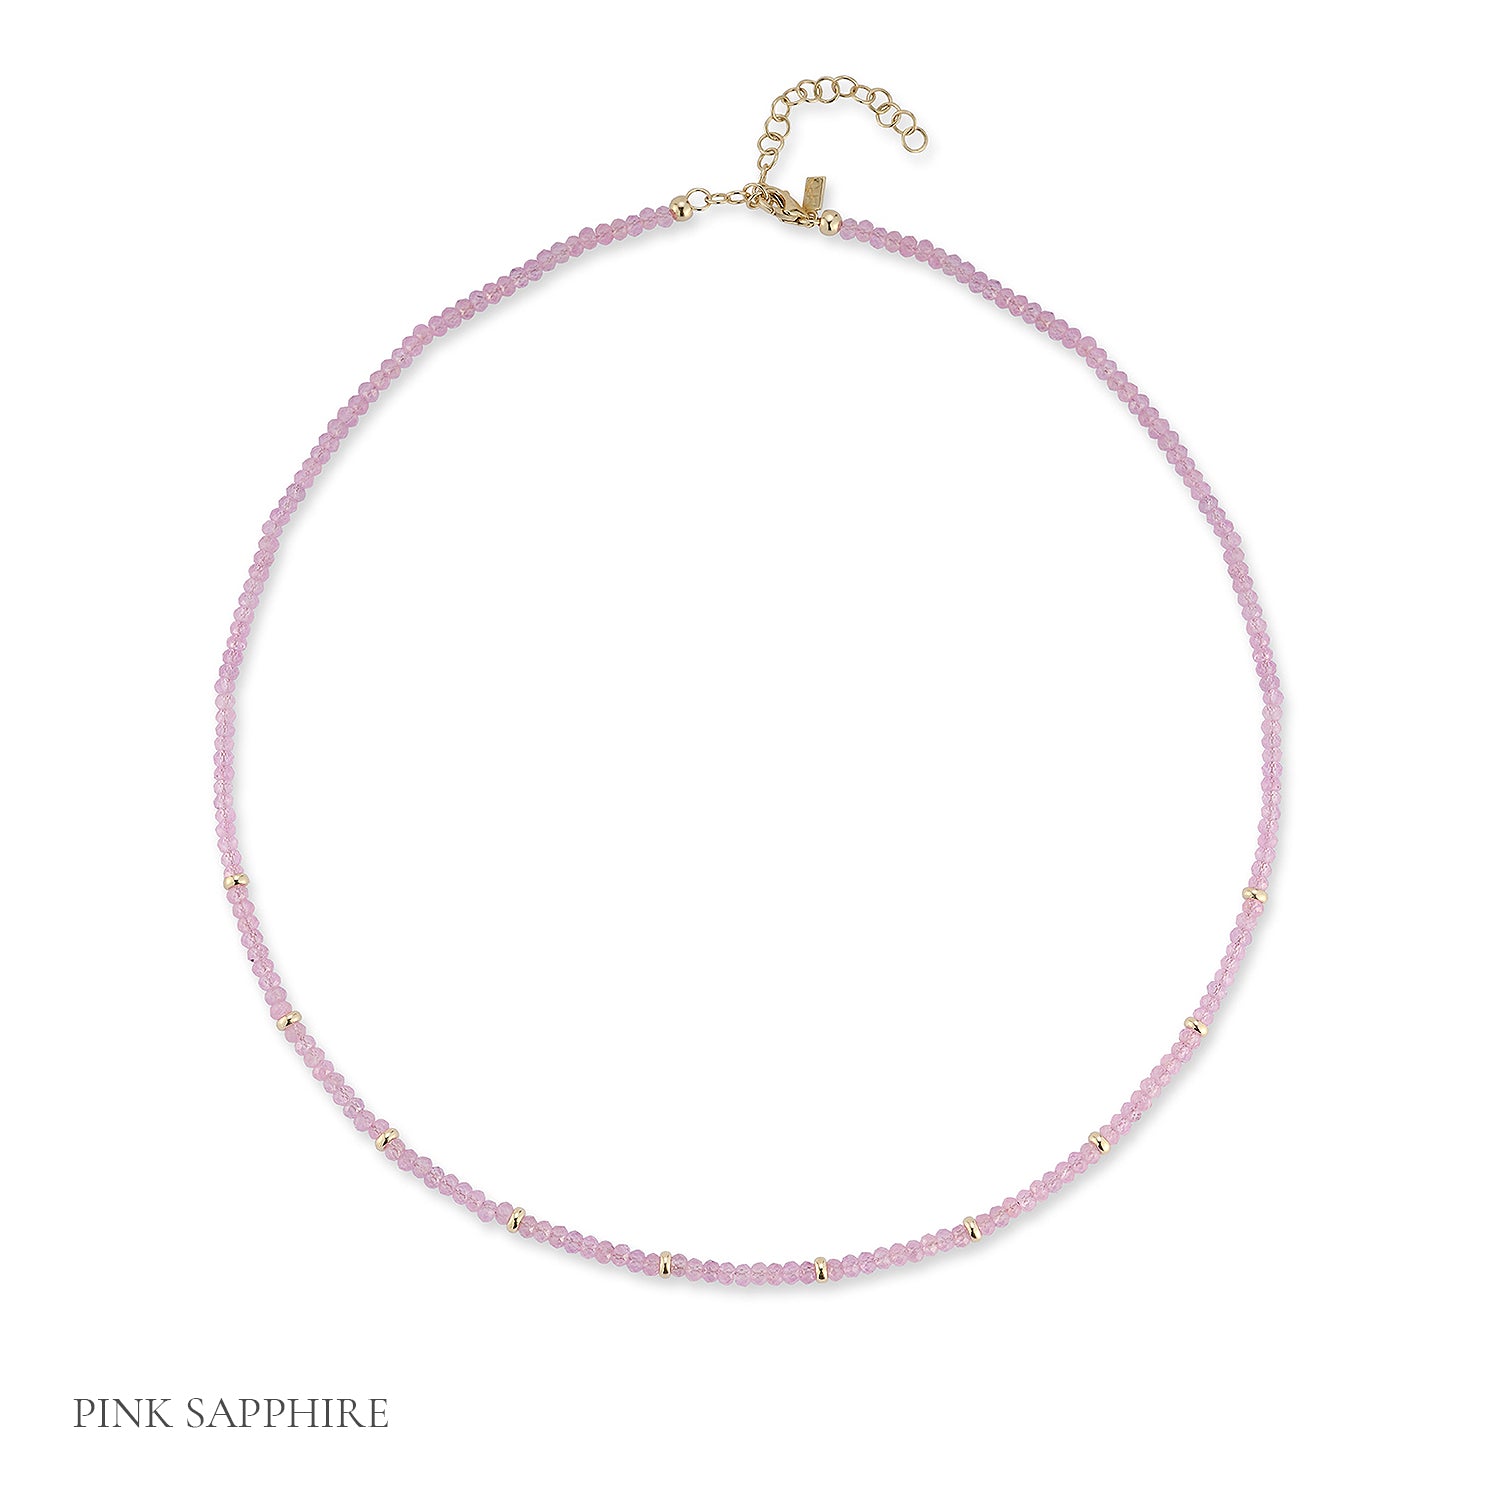 Birthstone Bead Necklace In Pink Sapphire with 14k yellow gold chain - September Option